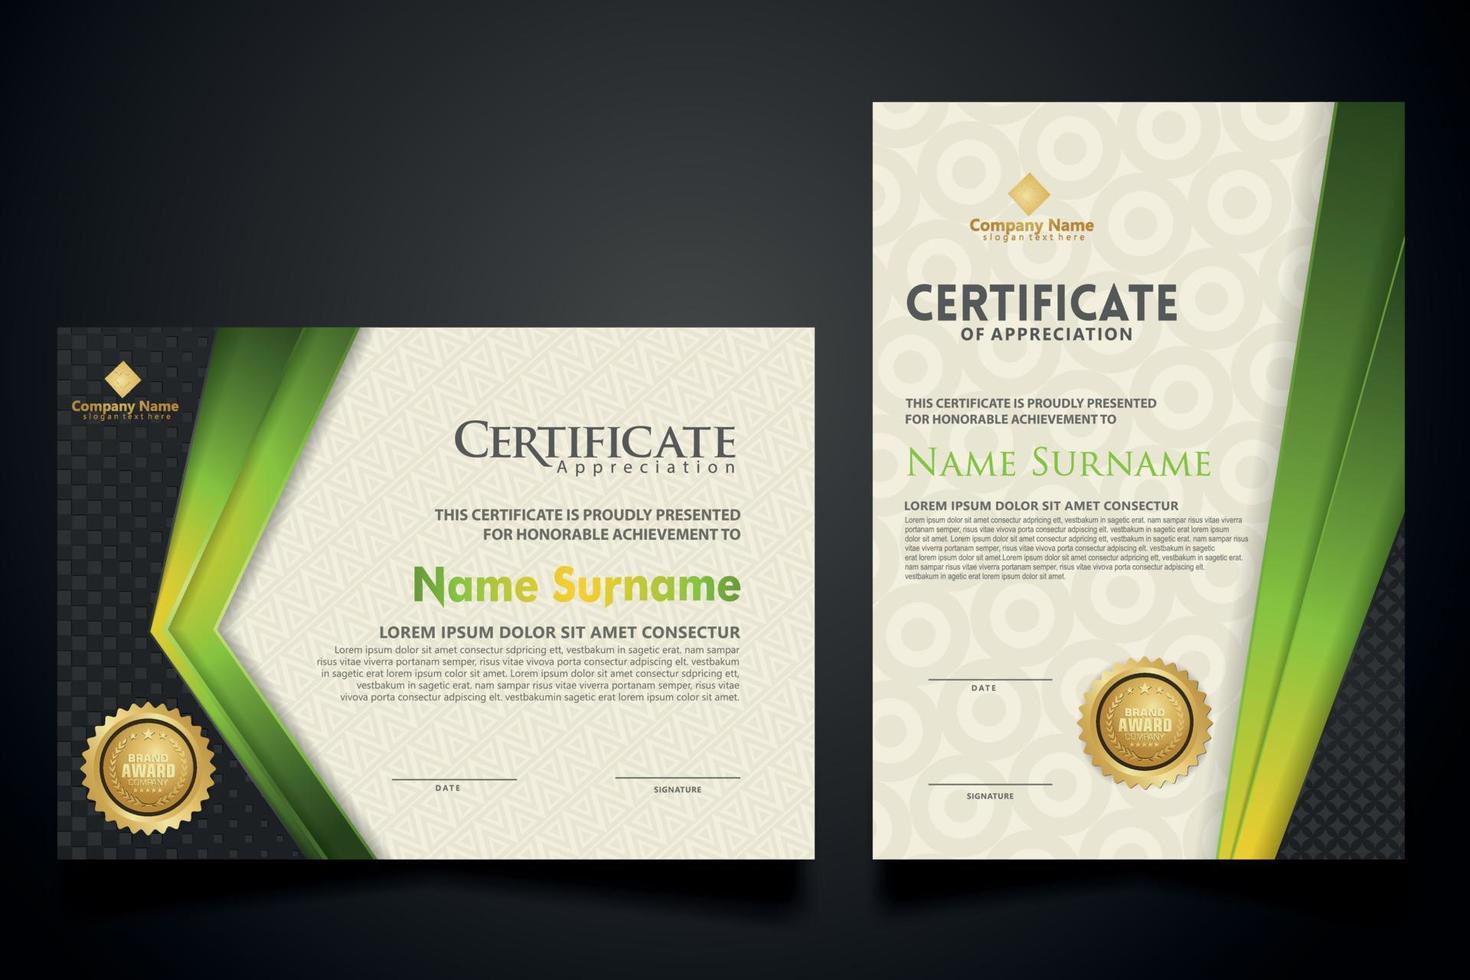 certificate template with Luxury realistic texture pattern and dynamic shapes composition gradient colors,diploma,Vector illustration vector